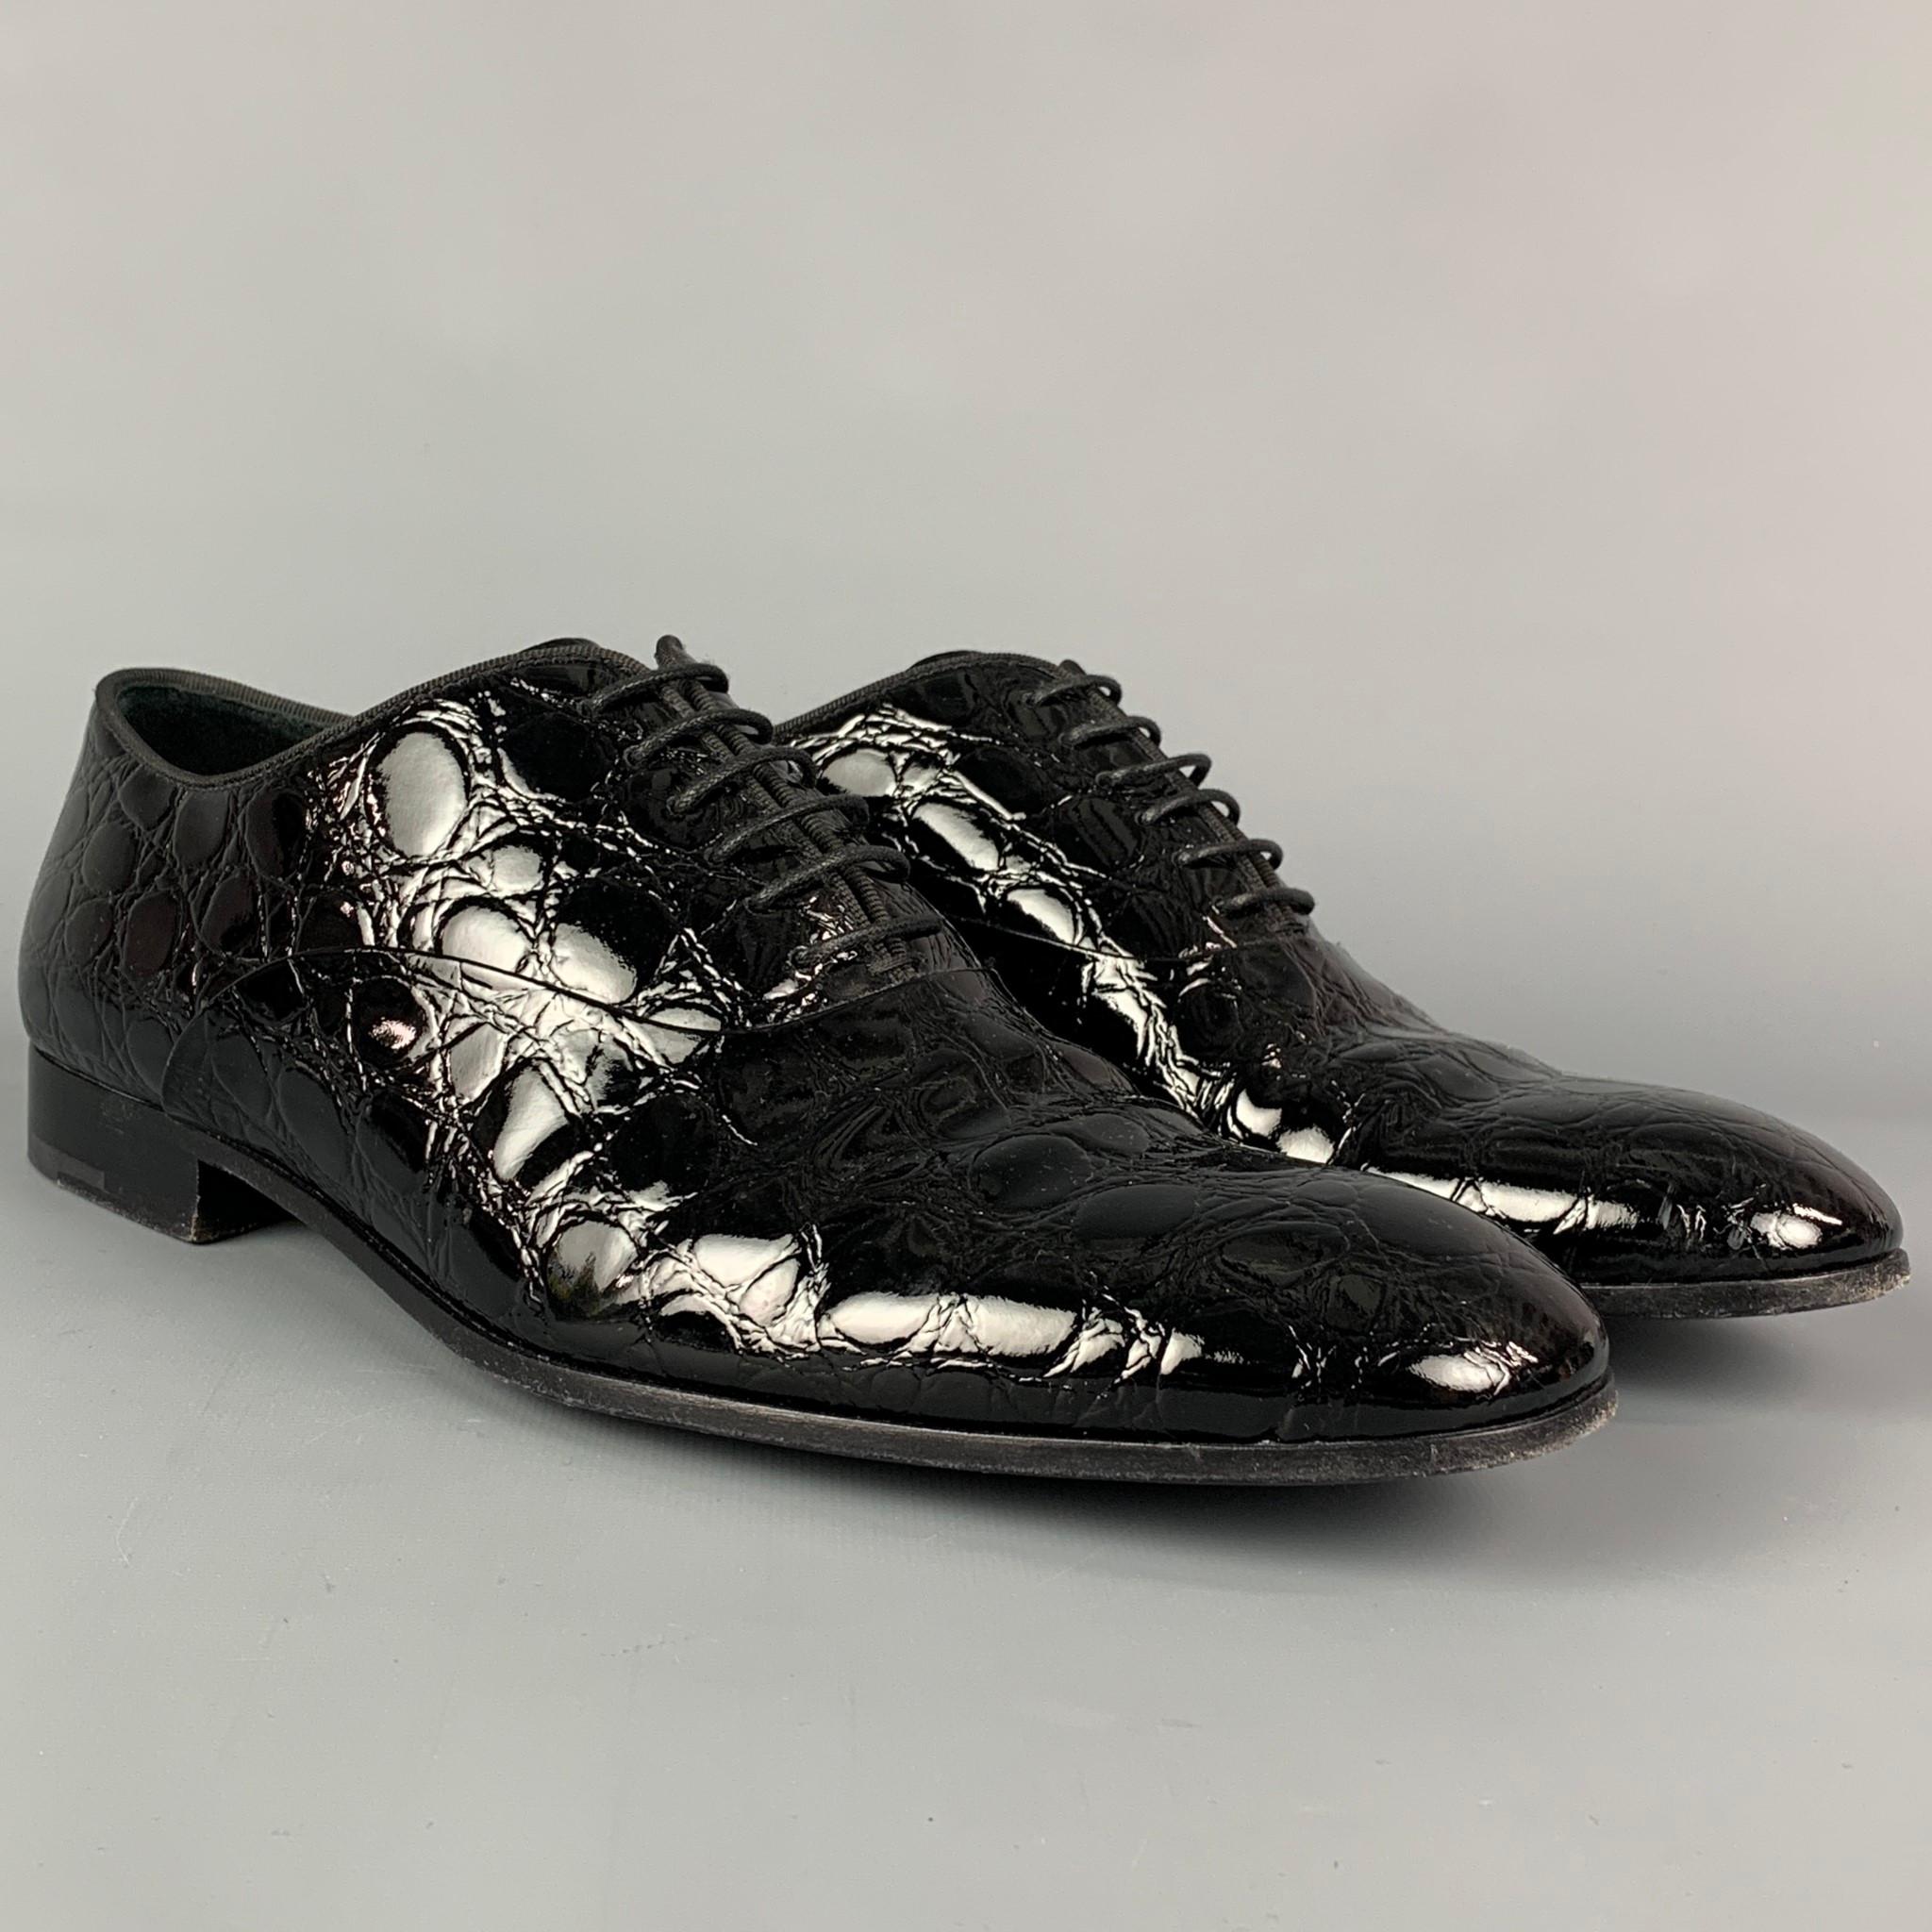 GIORGIO ARMANI shoes comes in a black embossed leather featuring a cap toe, leather sole, and a lace up closure. Made in Italy. 

Very Good Pre-Owned Condition.
Marked: 9 / X2C440

Outsole: 12.25 in. x 4 in. 